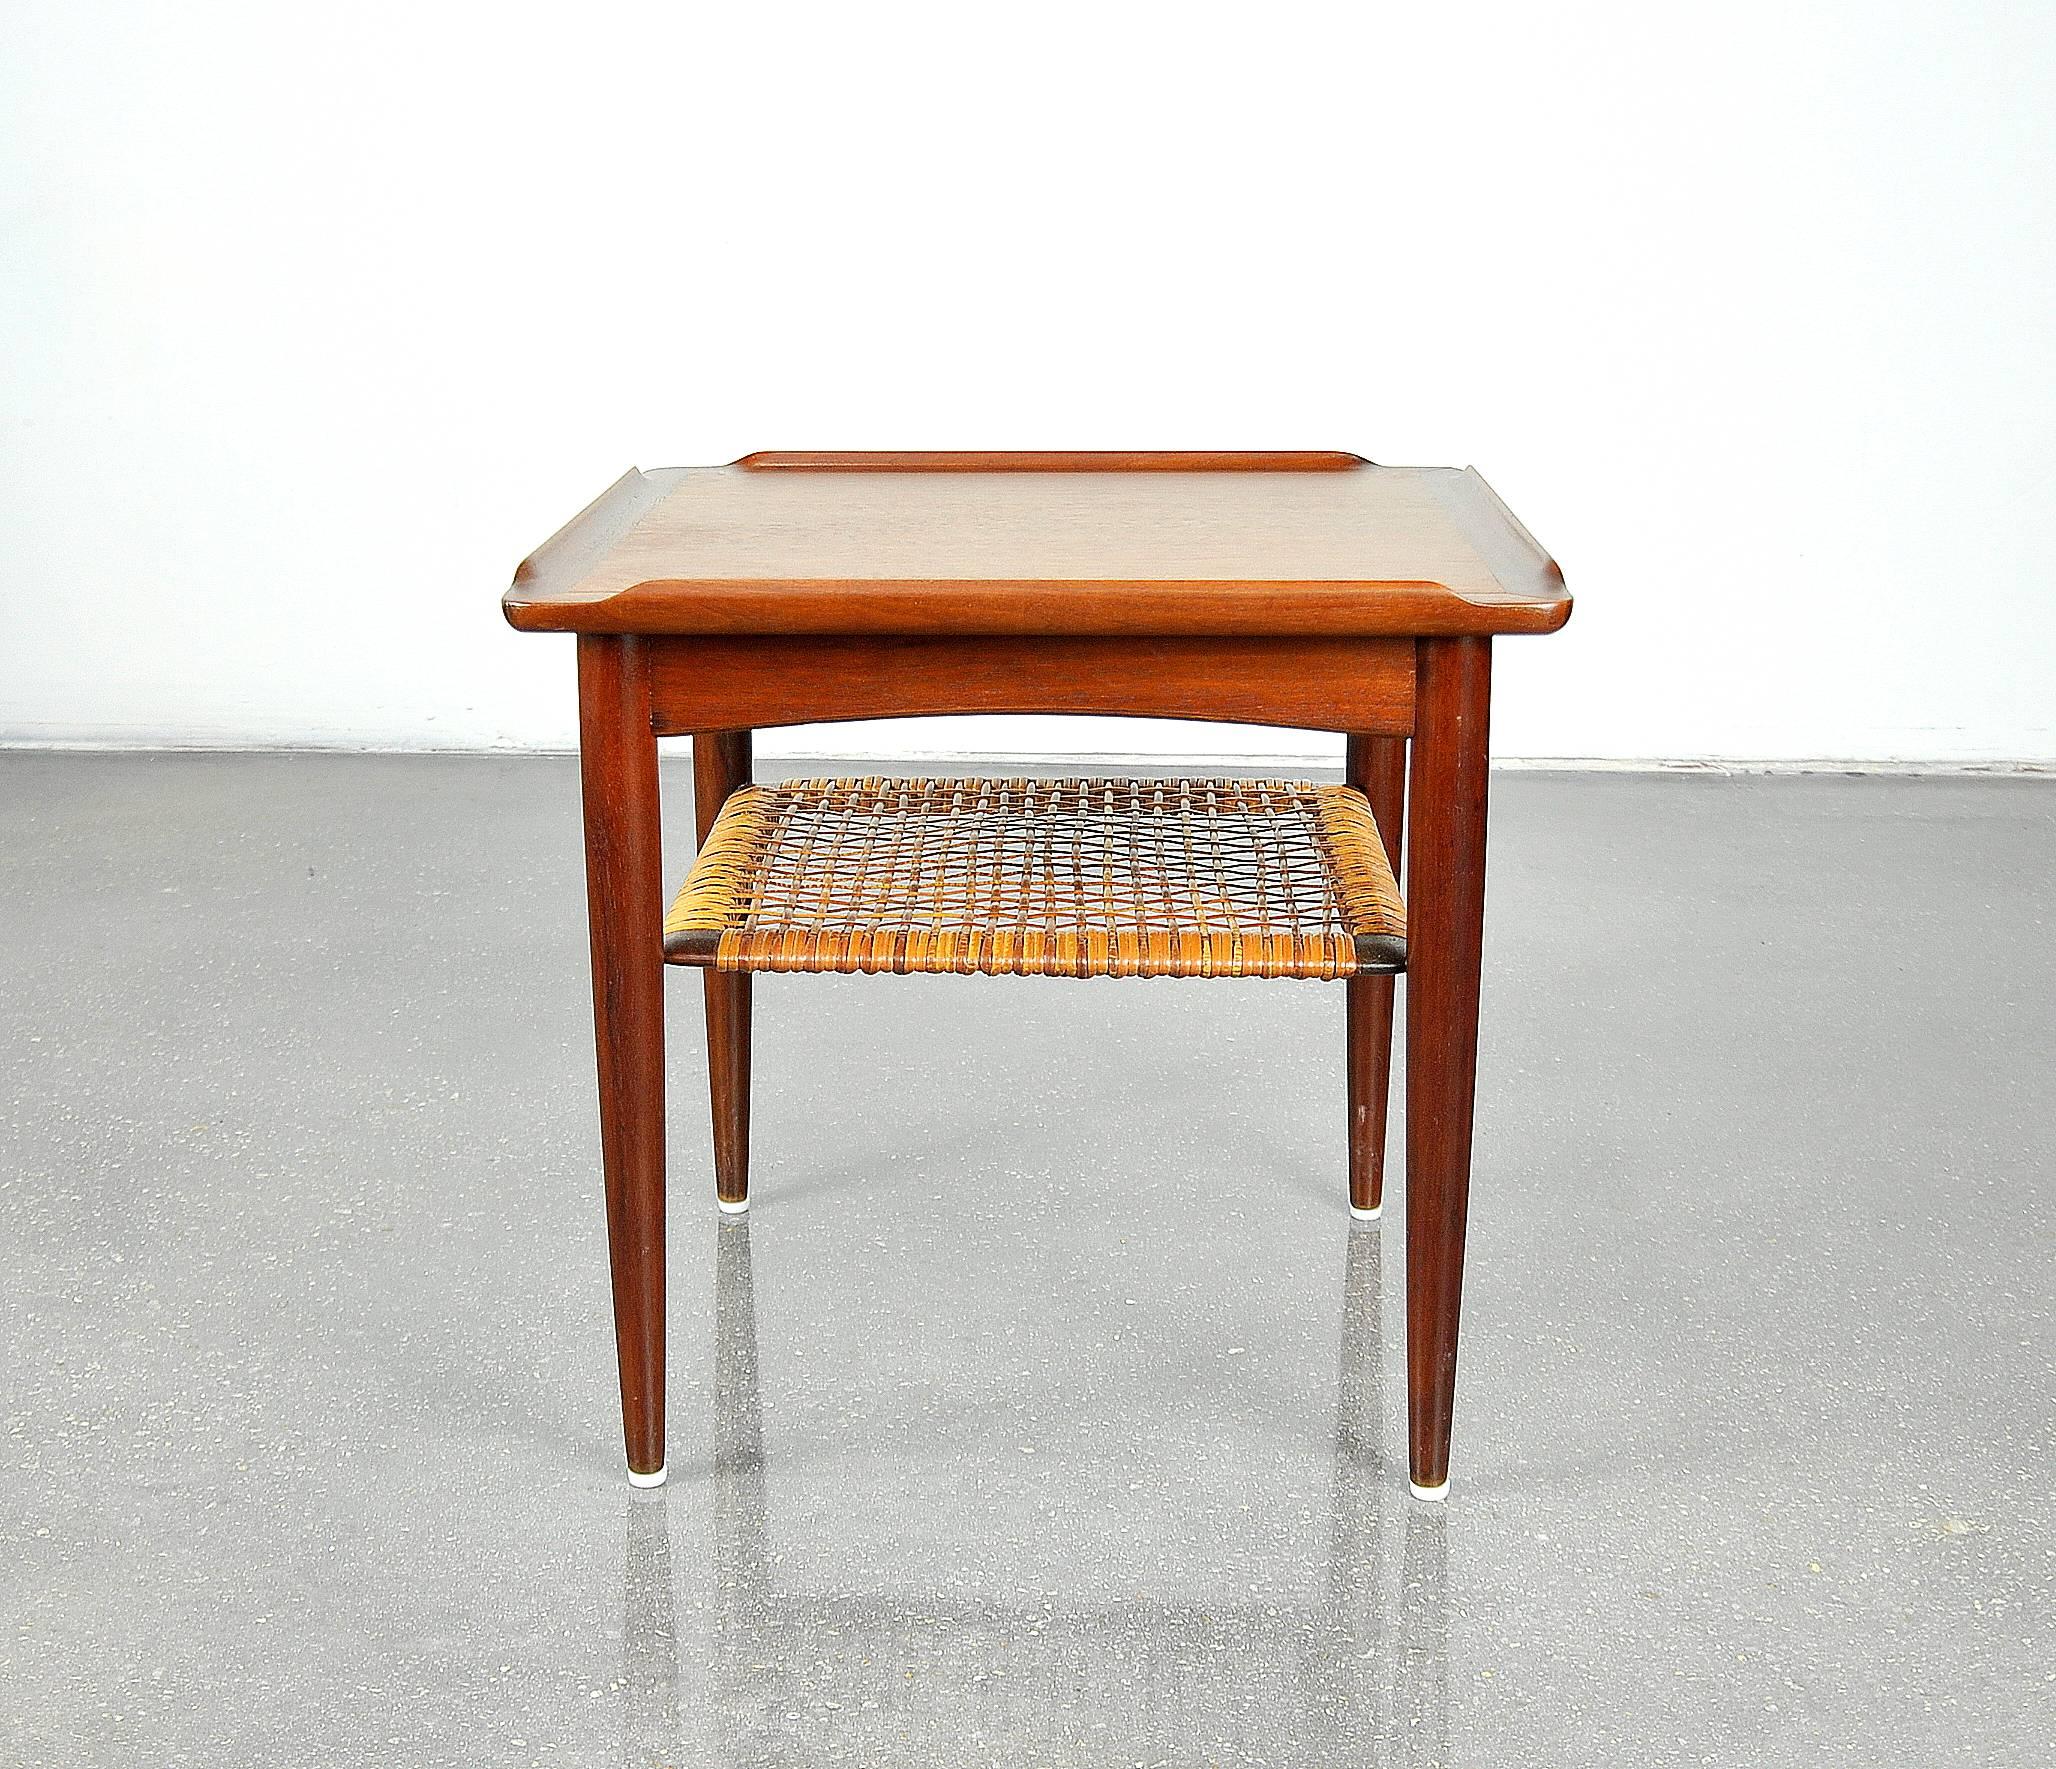 A pretty Danish modern square end table designed by Poul Jensen for Selig in the 1960s. This Mid-Century solid teak petite occasional table features sculpted raised edges and a caned magazine shelf that, being fitted with discreet brass hardware,